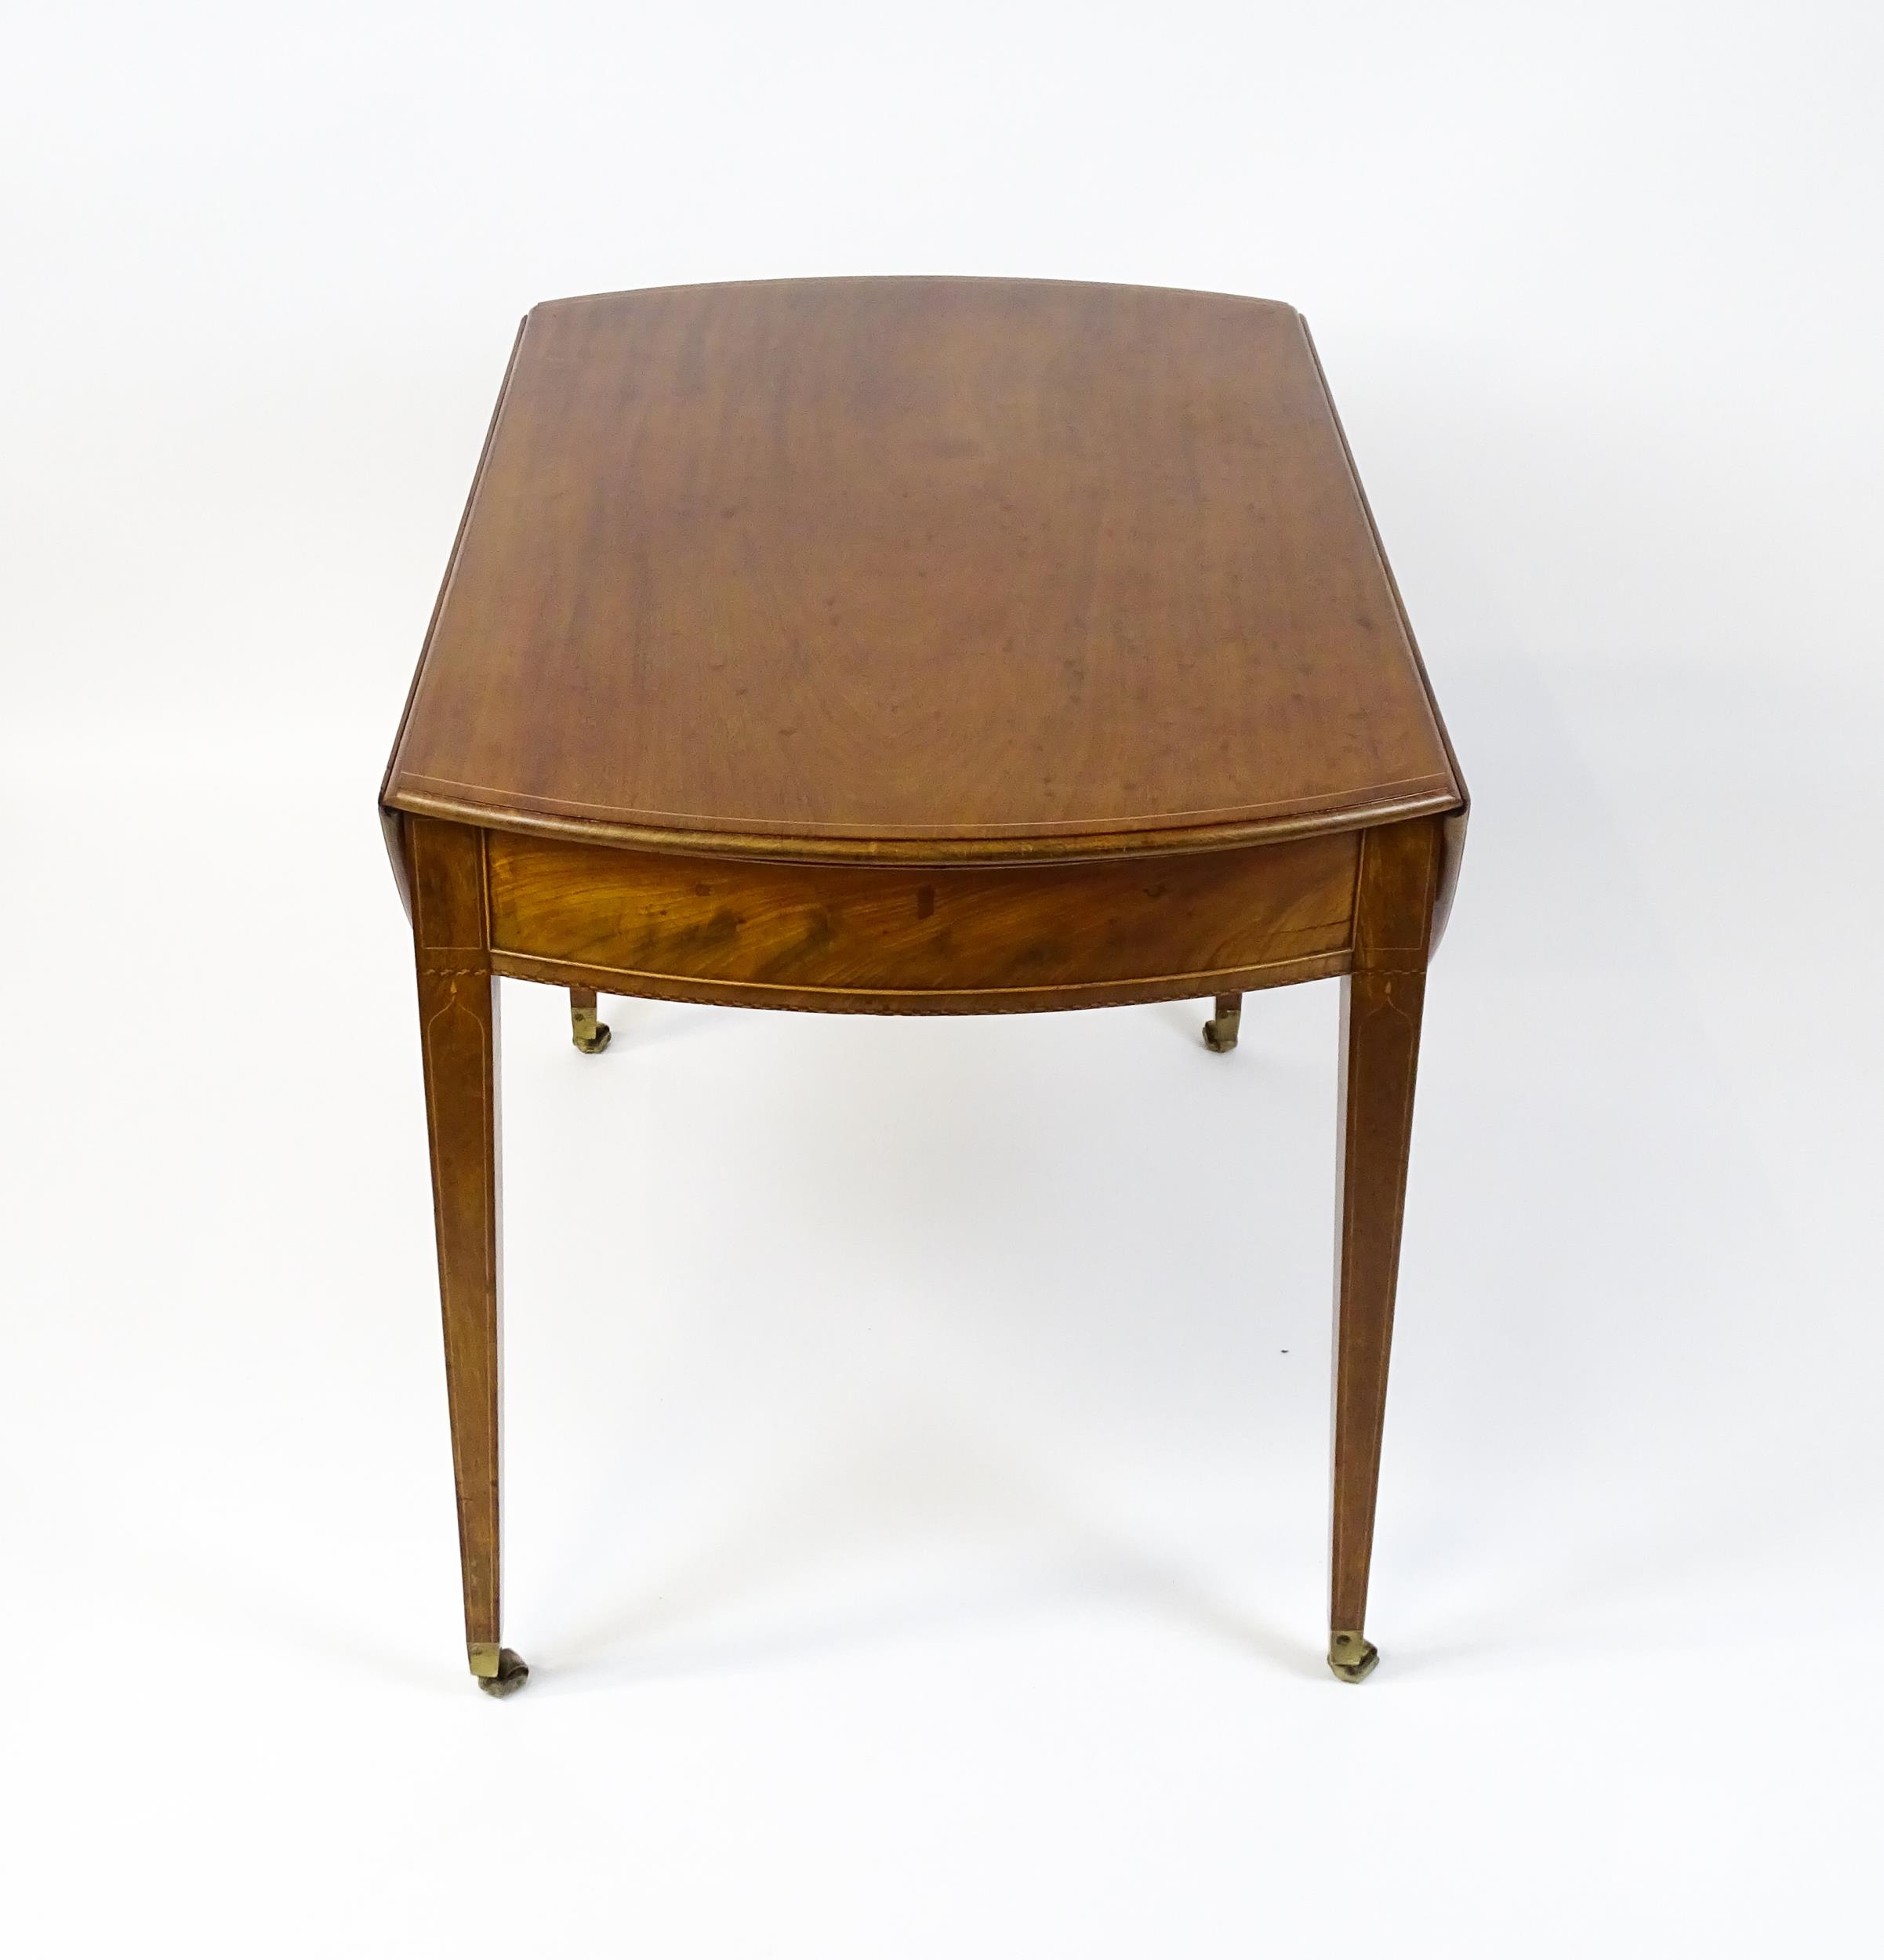 An early 19thC mahogany Pembroke table with a satinwood strung top above a single frieze drawer - Image 2 of 11